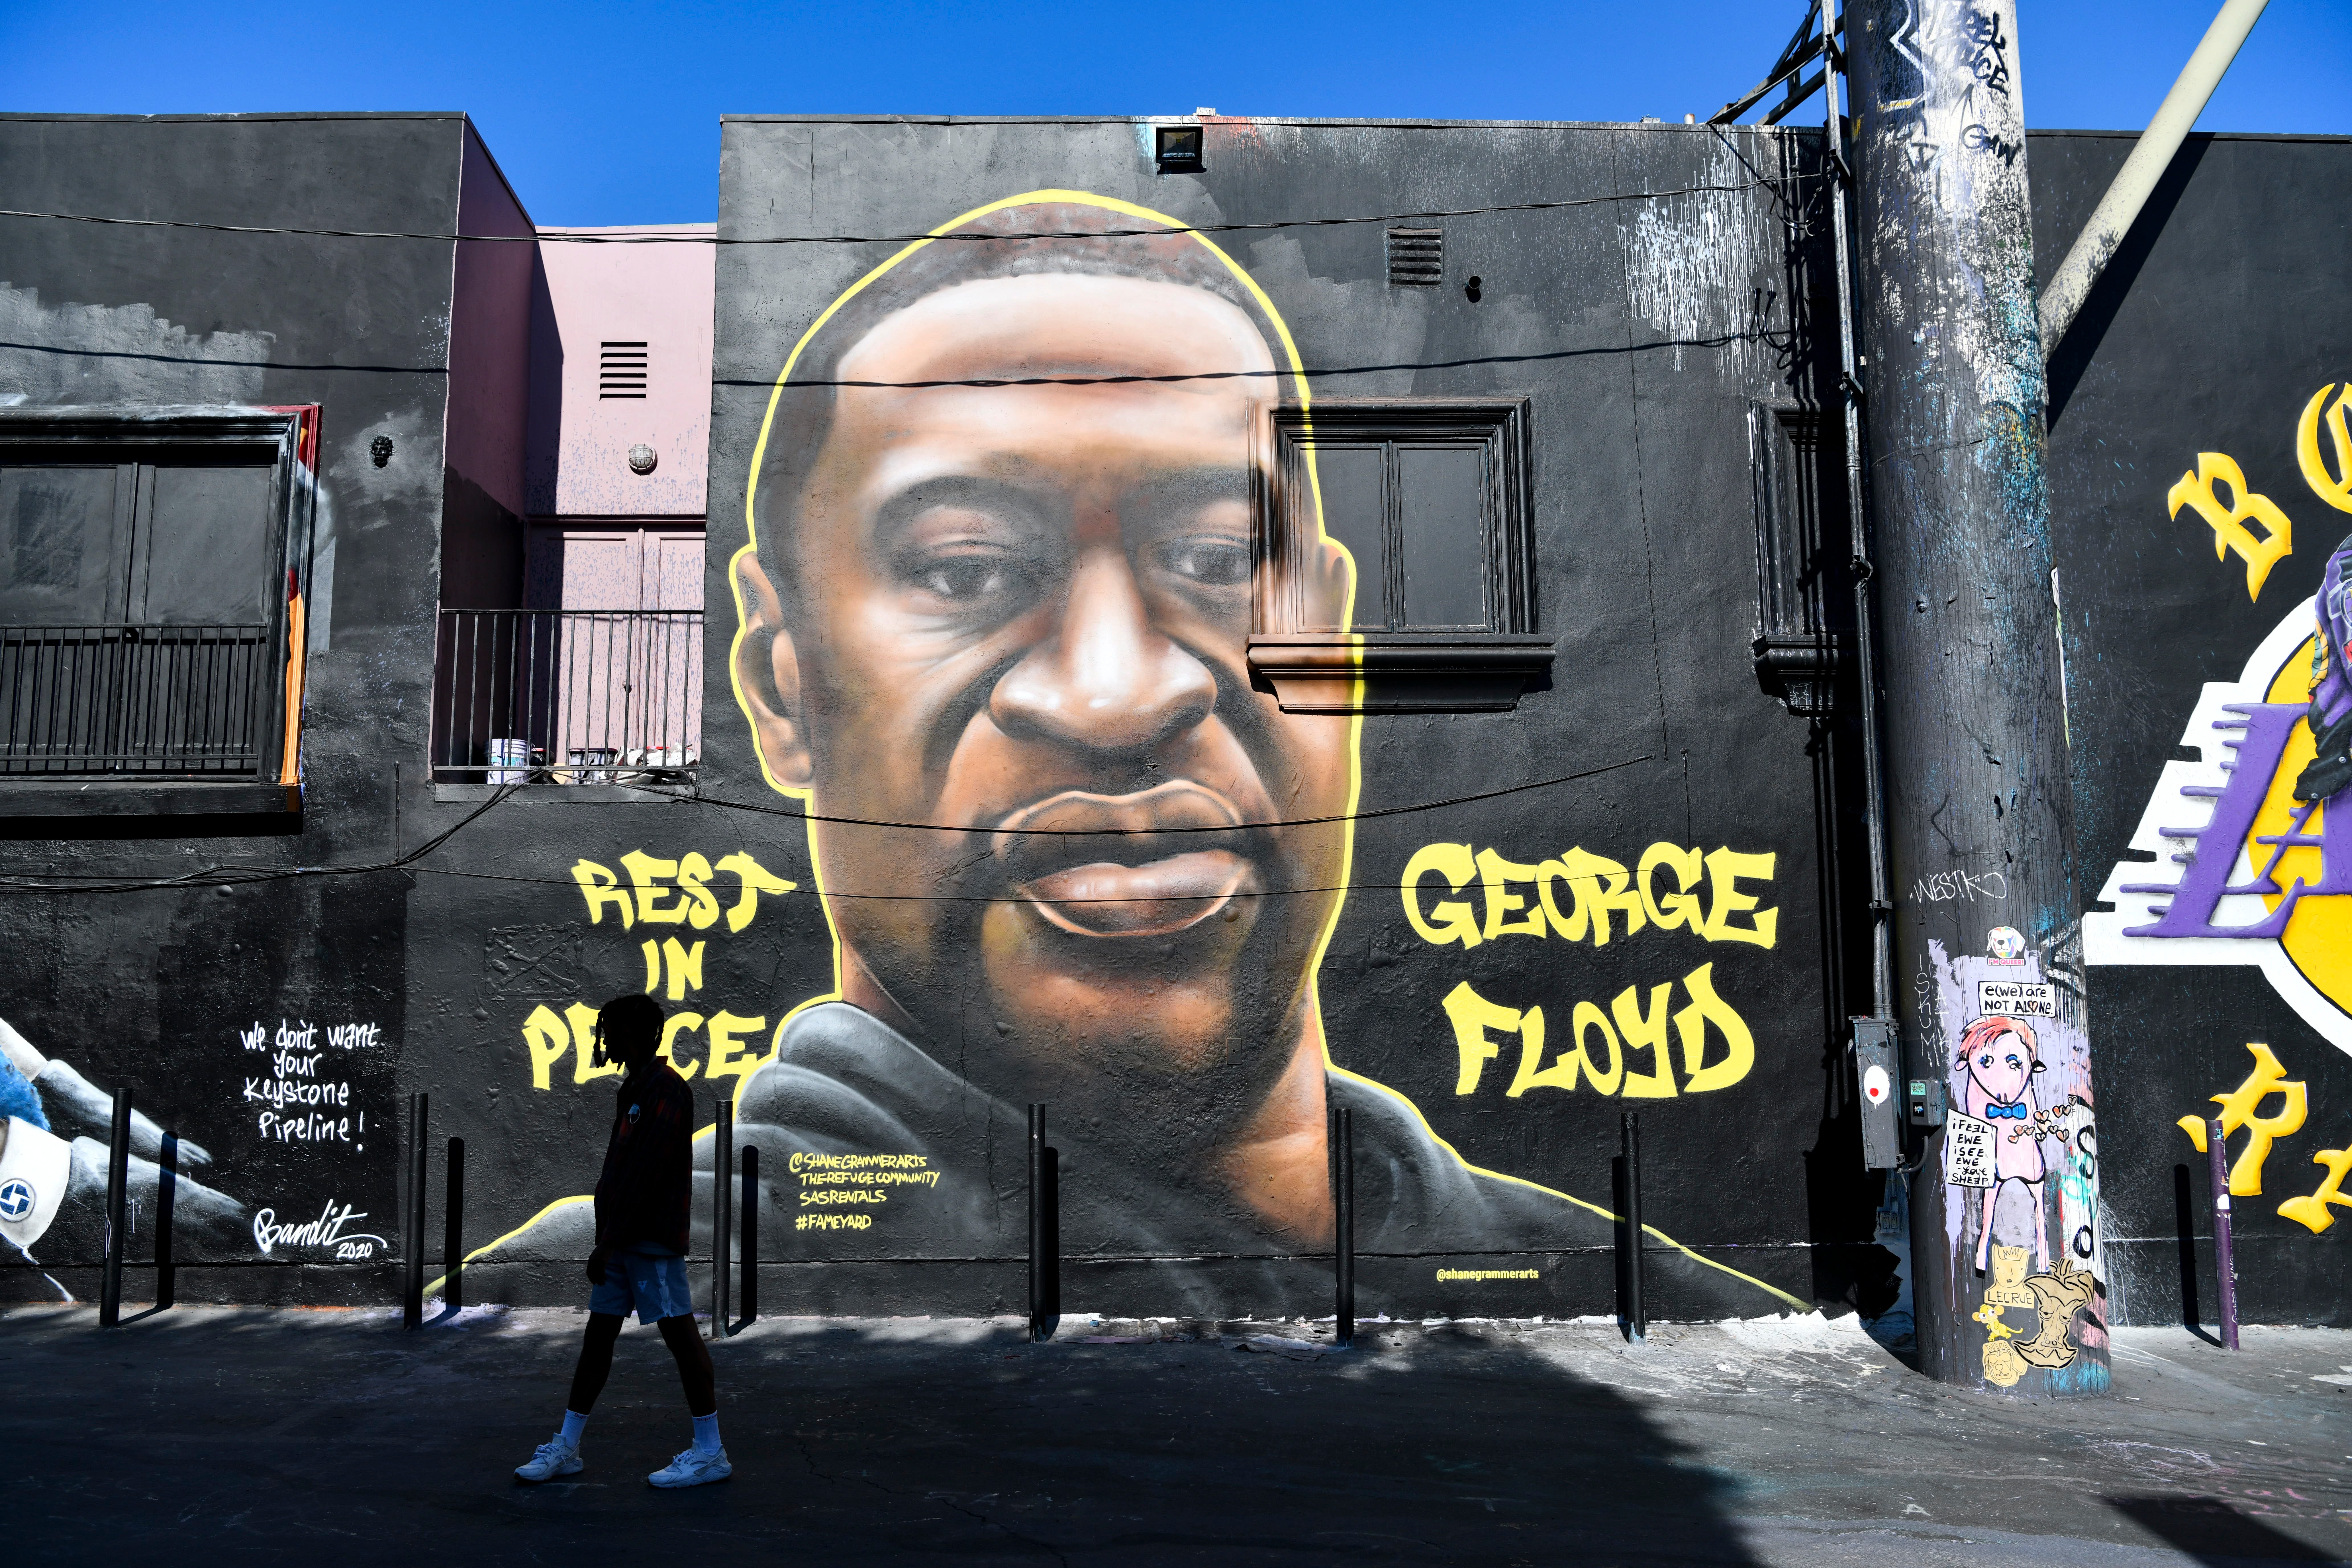 Artist Shane Grammer recently painted a mural of George Floyd in West Hollywood.